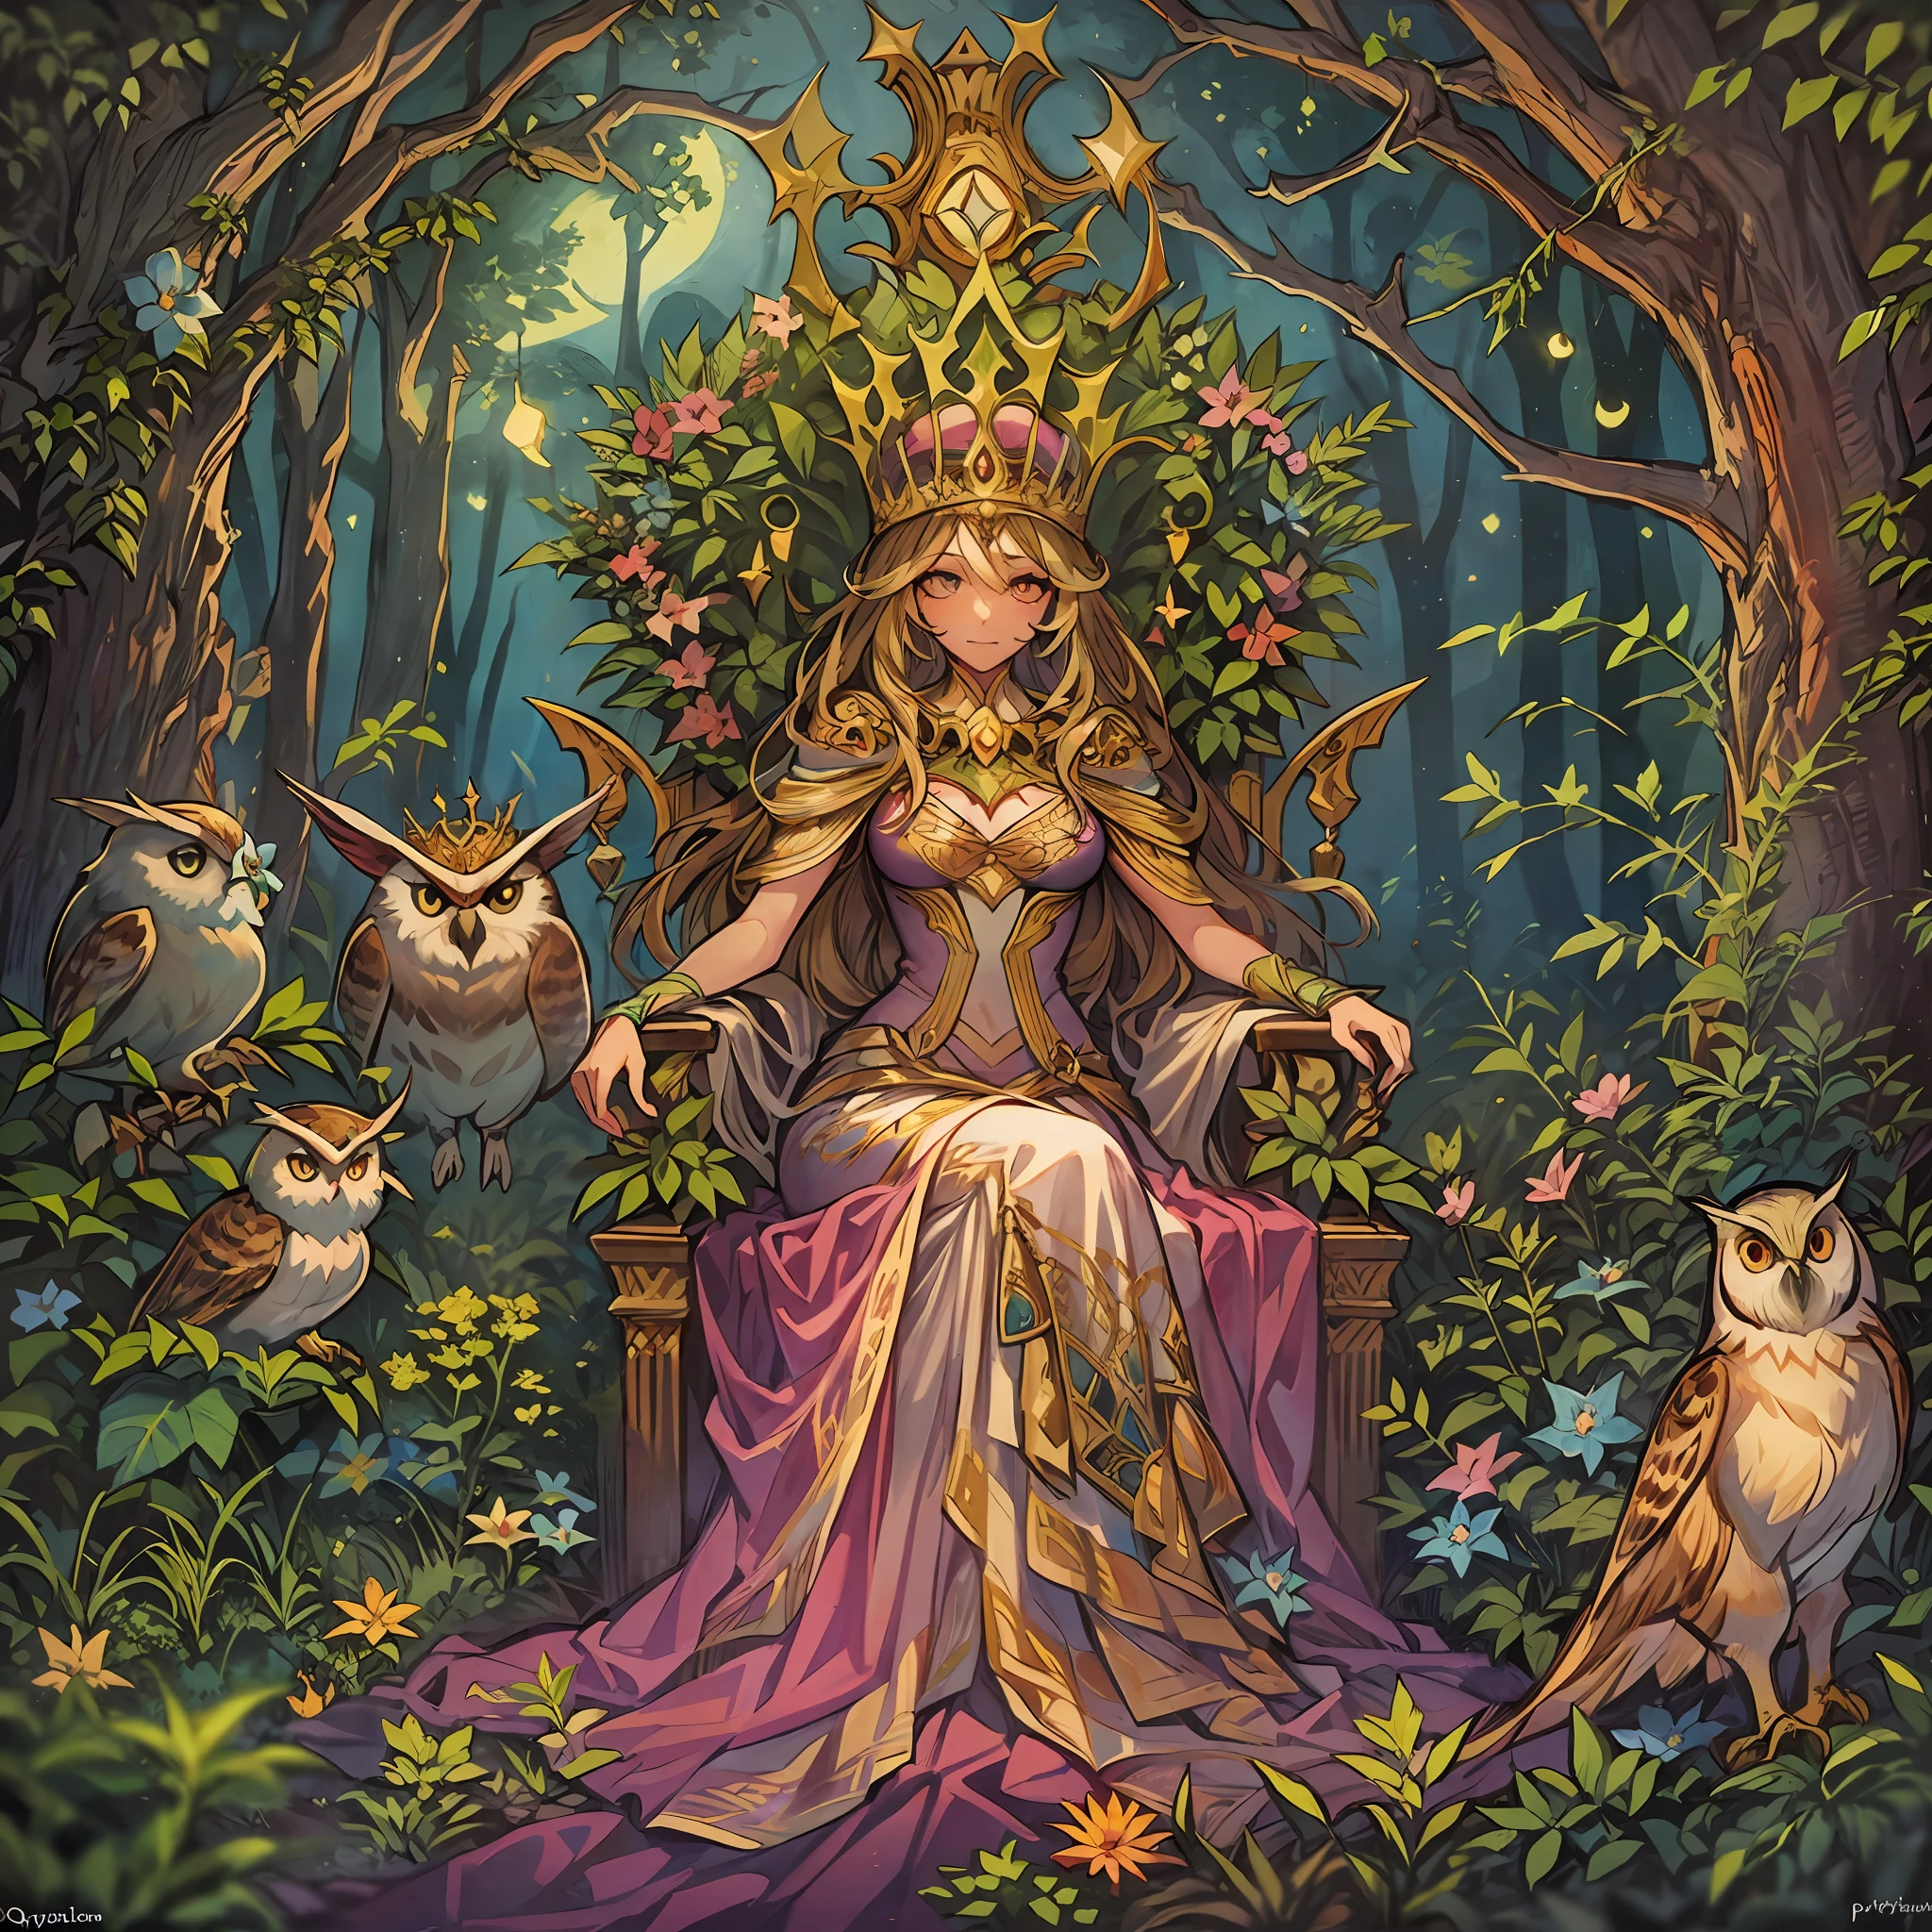 A throne formed of trees, plants and flowers, and a dryad queen seated on it. The queen wears a luxurious, Queen's skin is light brown., elaborate, and delicately decorated costume. A lush forest and moonlight illuminating the forest. The queen is accompanied by 1owl. Detailed drawings. Vivid colors. High image quality. PsyAI